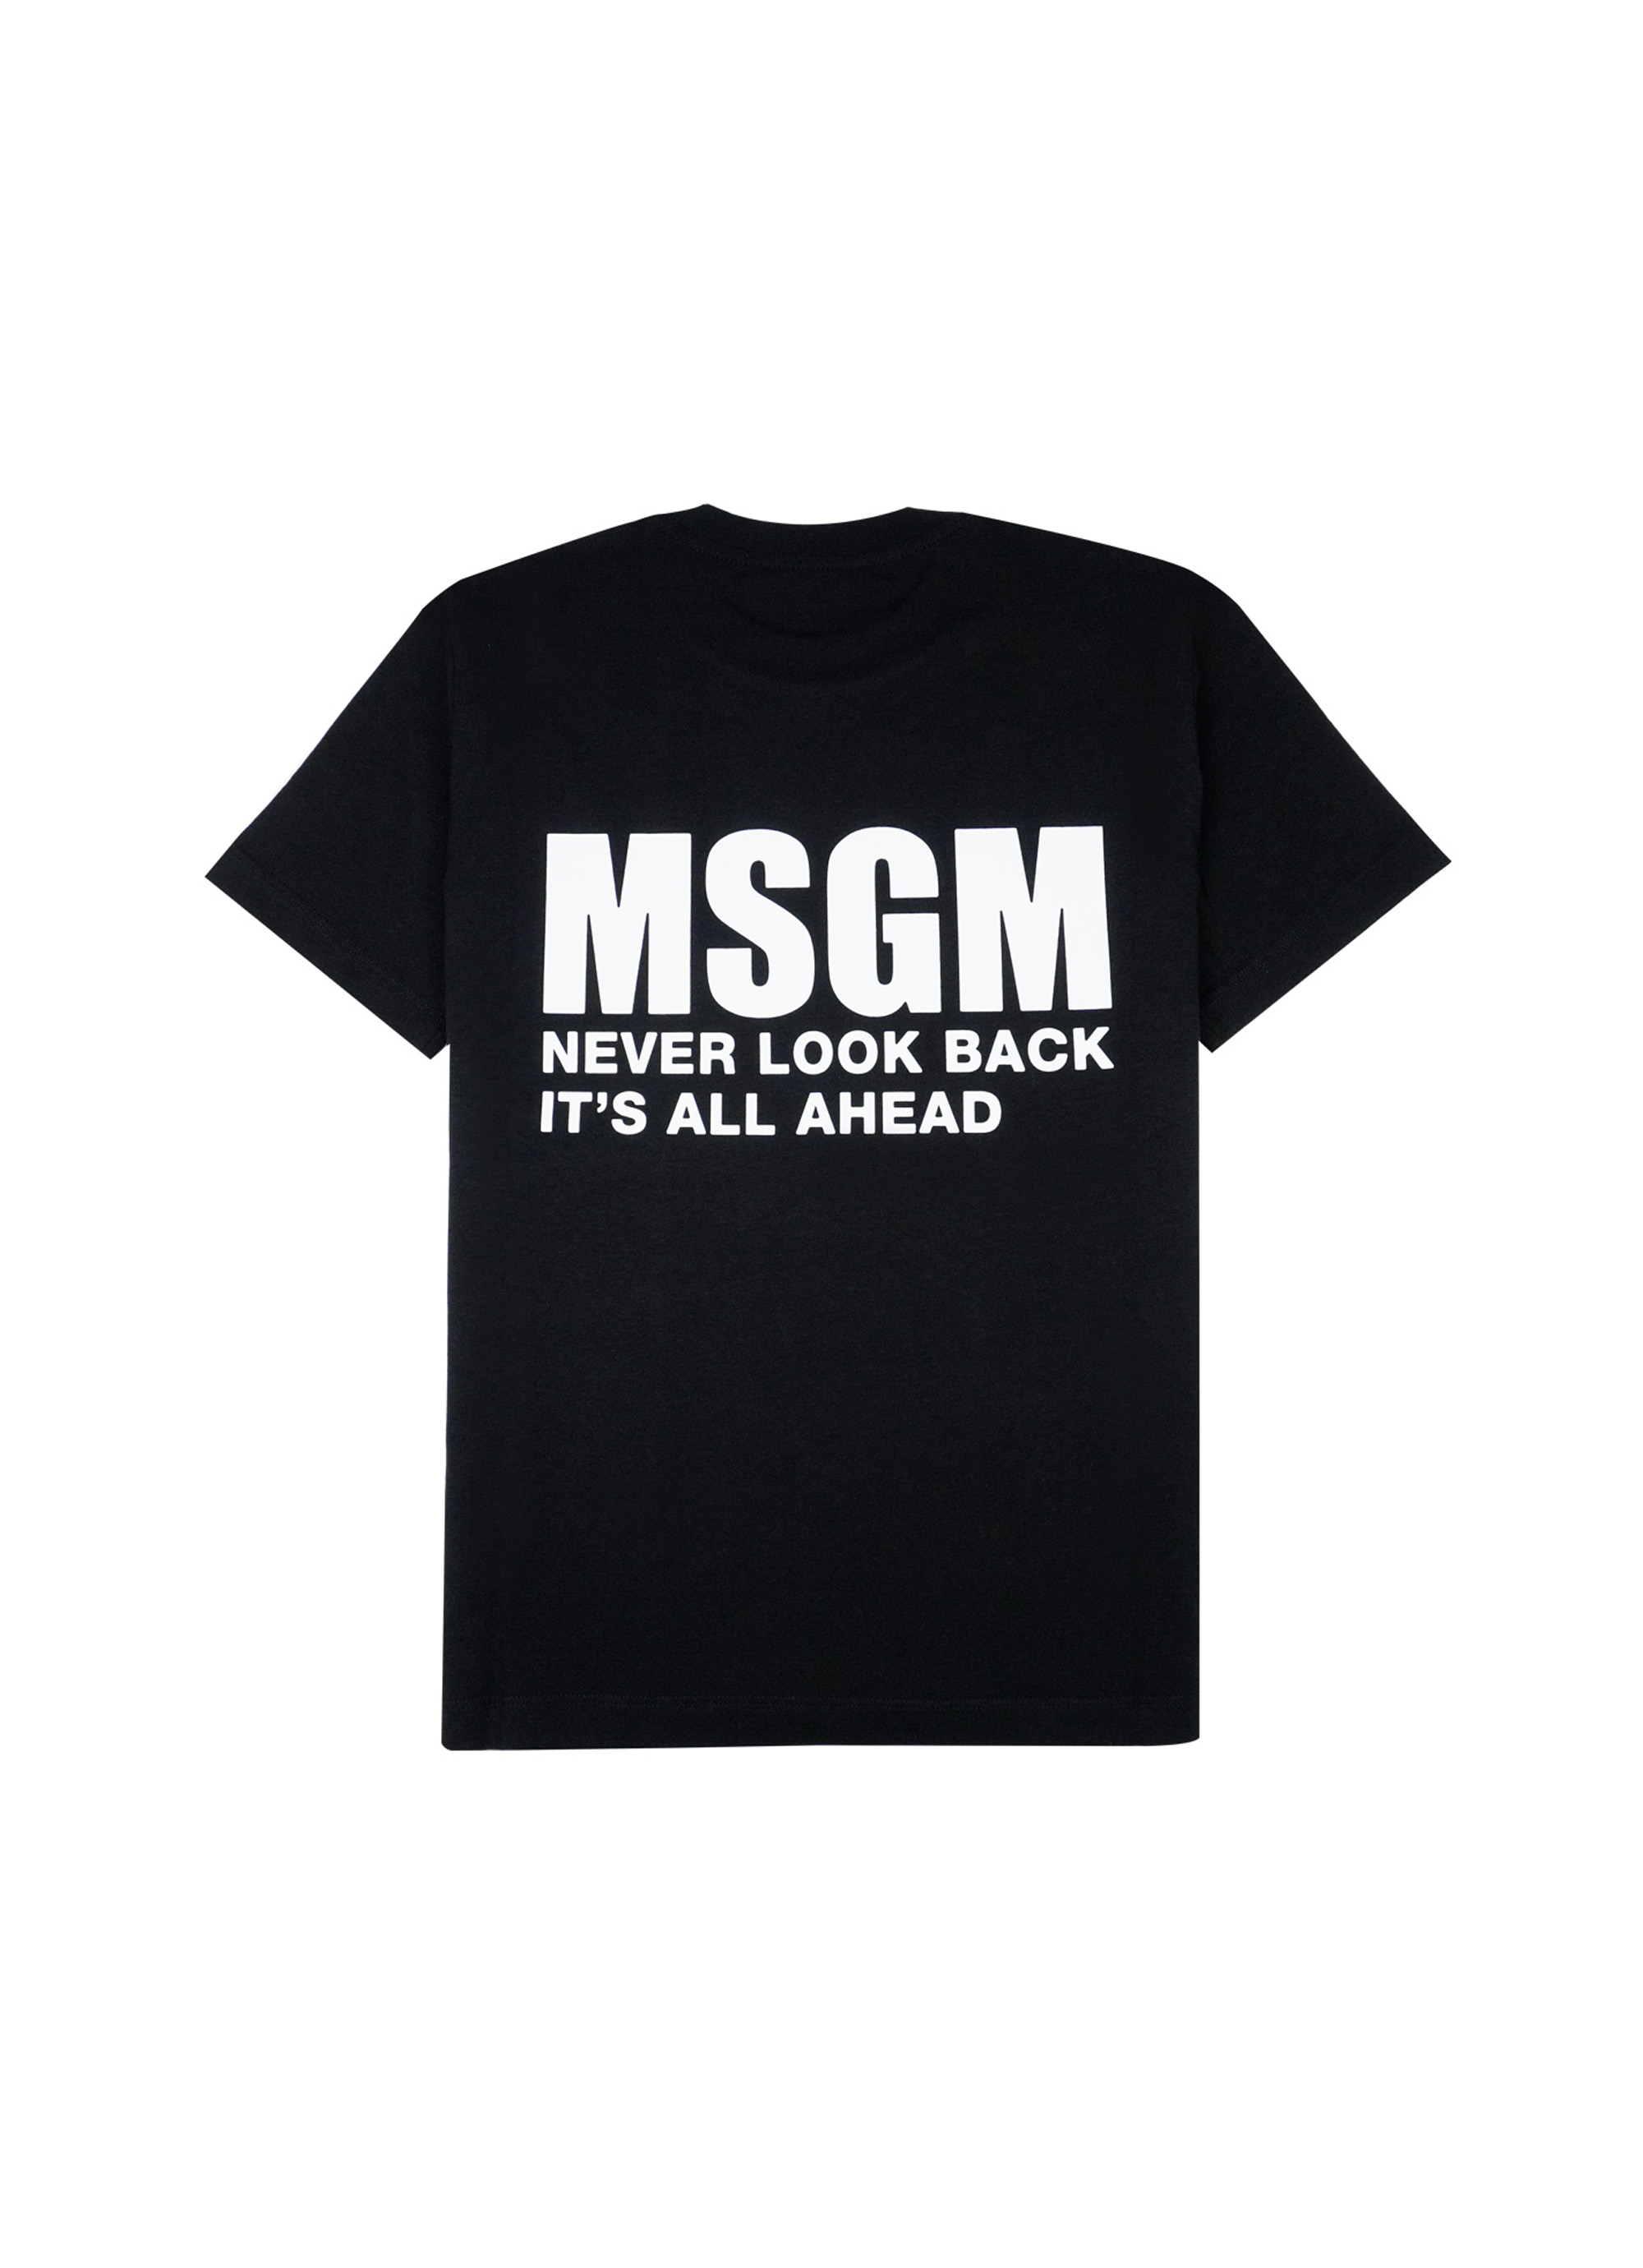 MSGM】 【NEVER LOOK BACK ステートメントロゴTシャツ】｜aoi公式